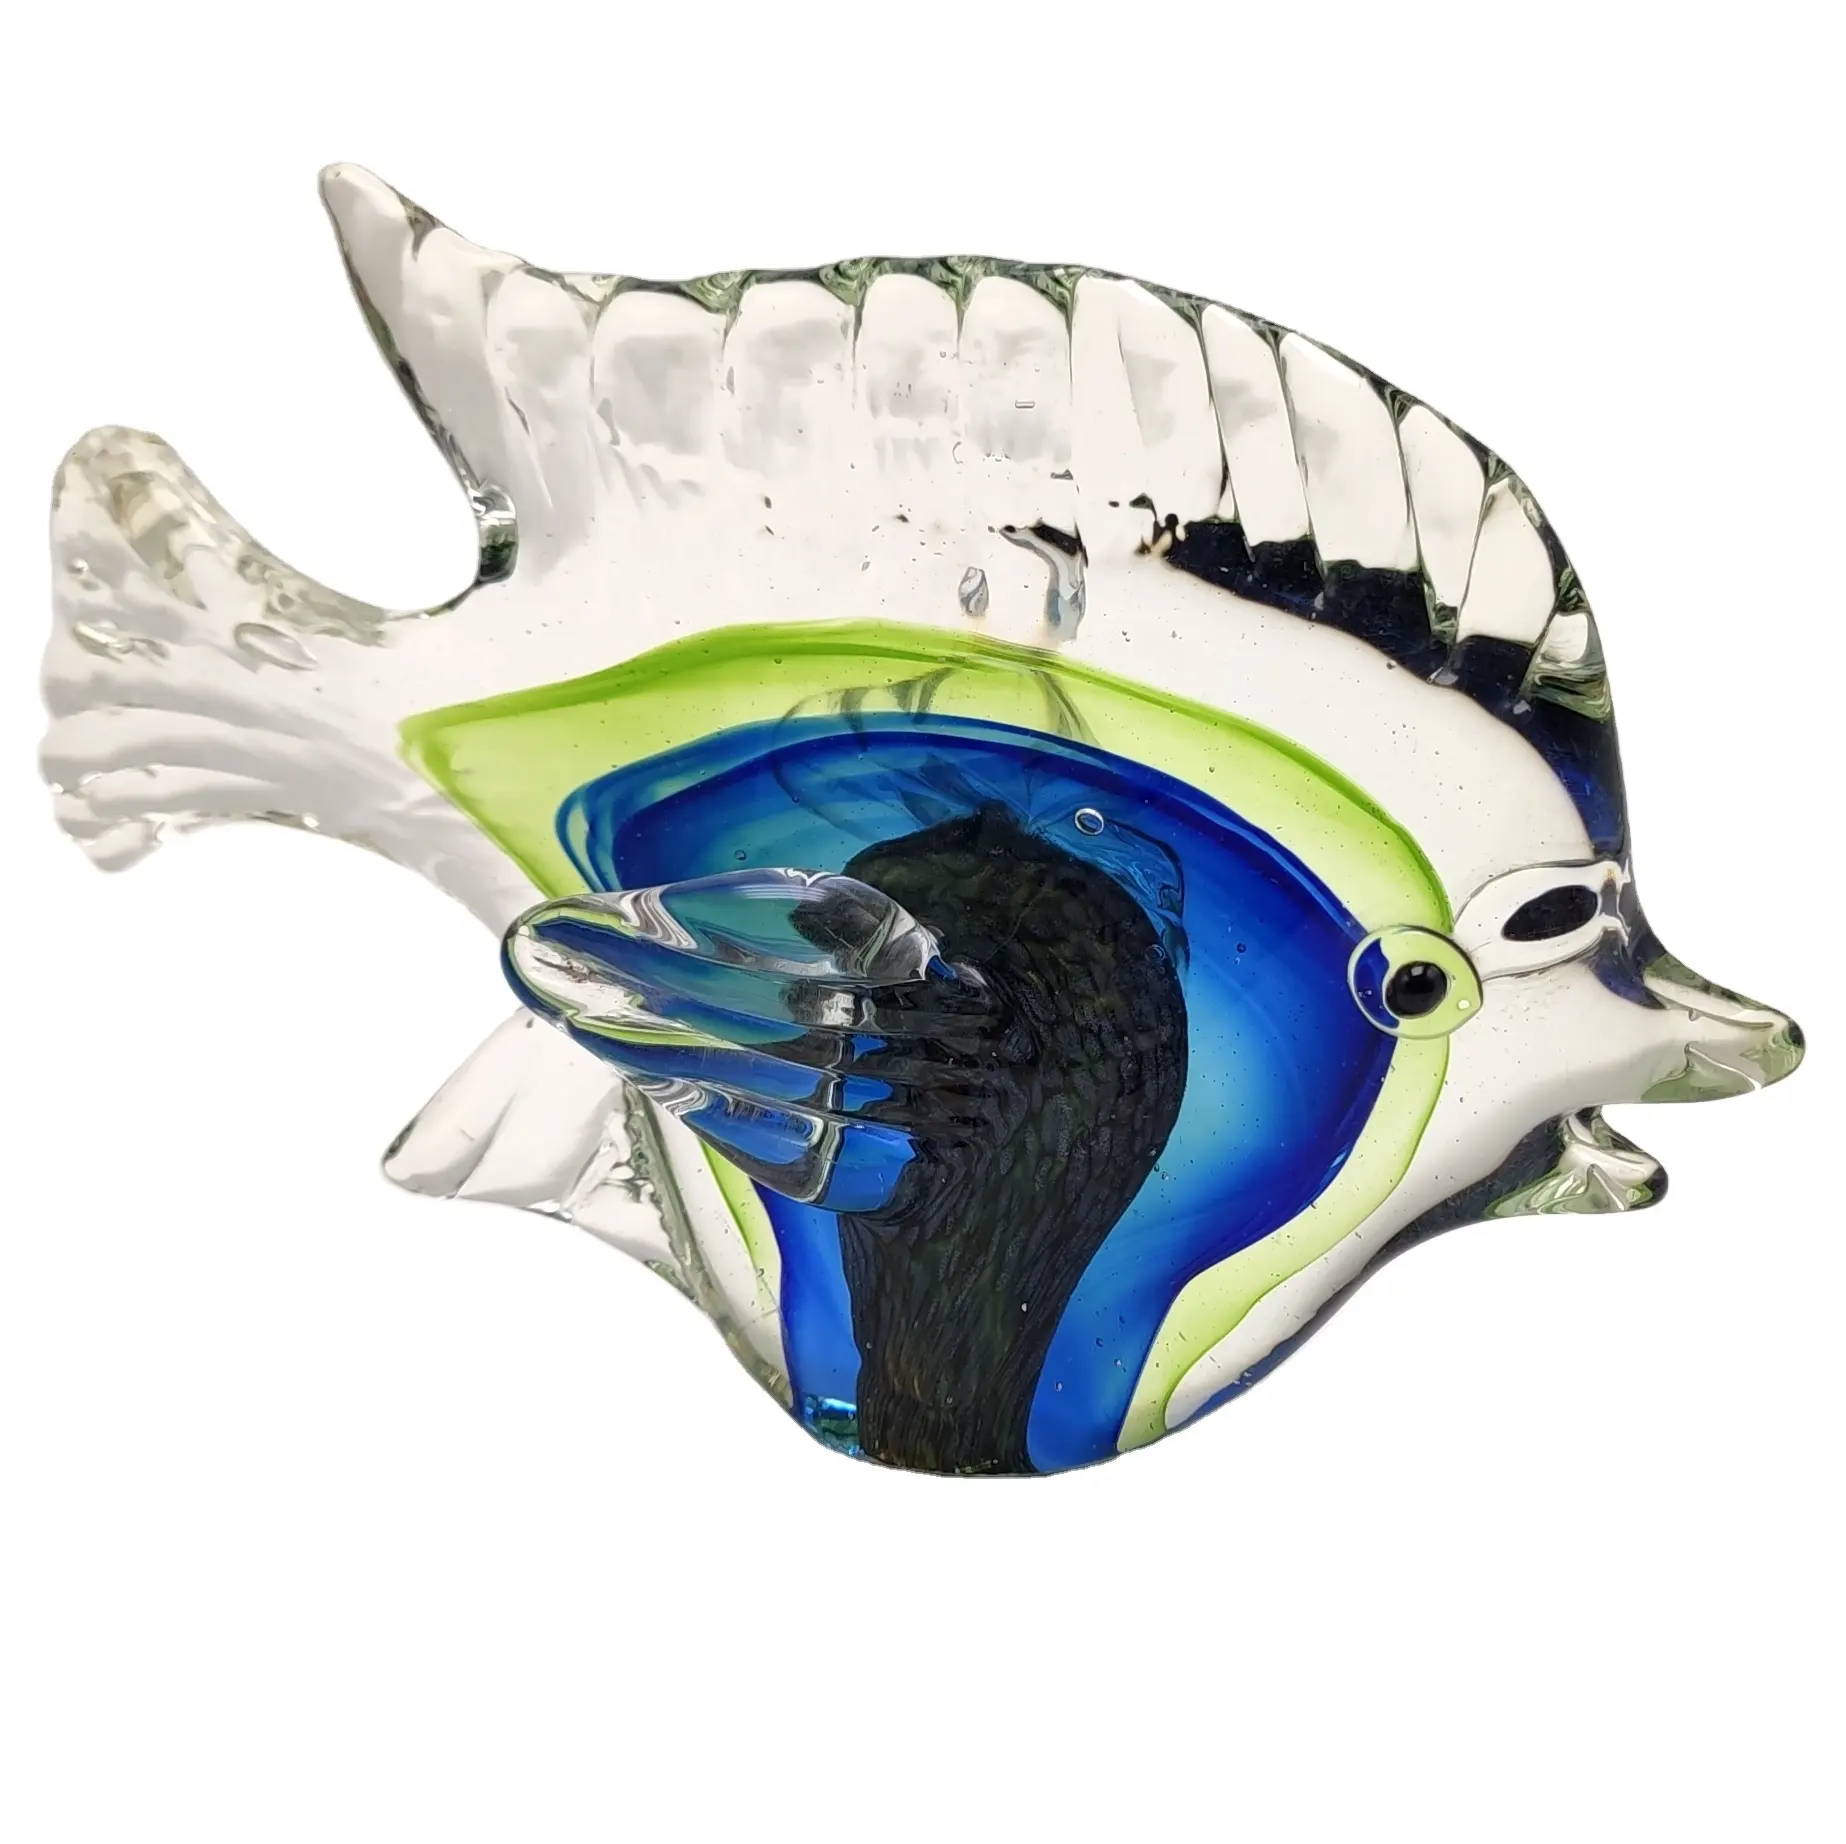 Fish Wall Art Handcrafted Glass Tropical Fish Decor For Bathroom Pool Patio Pretty Gift